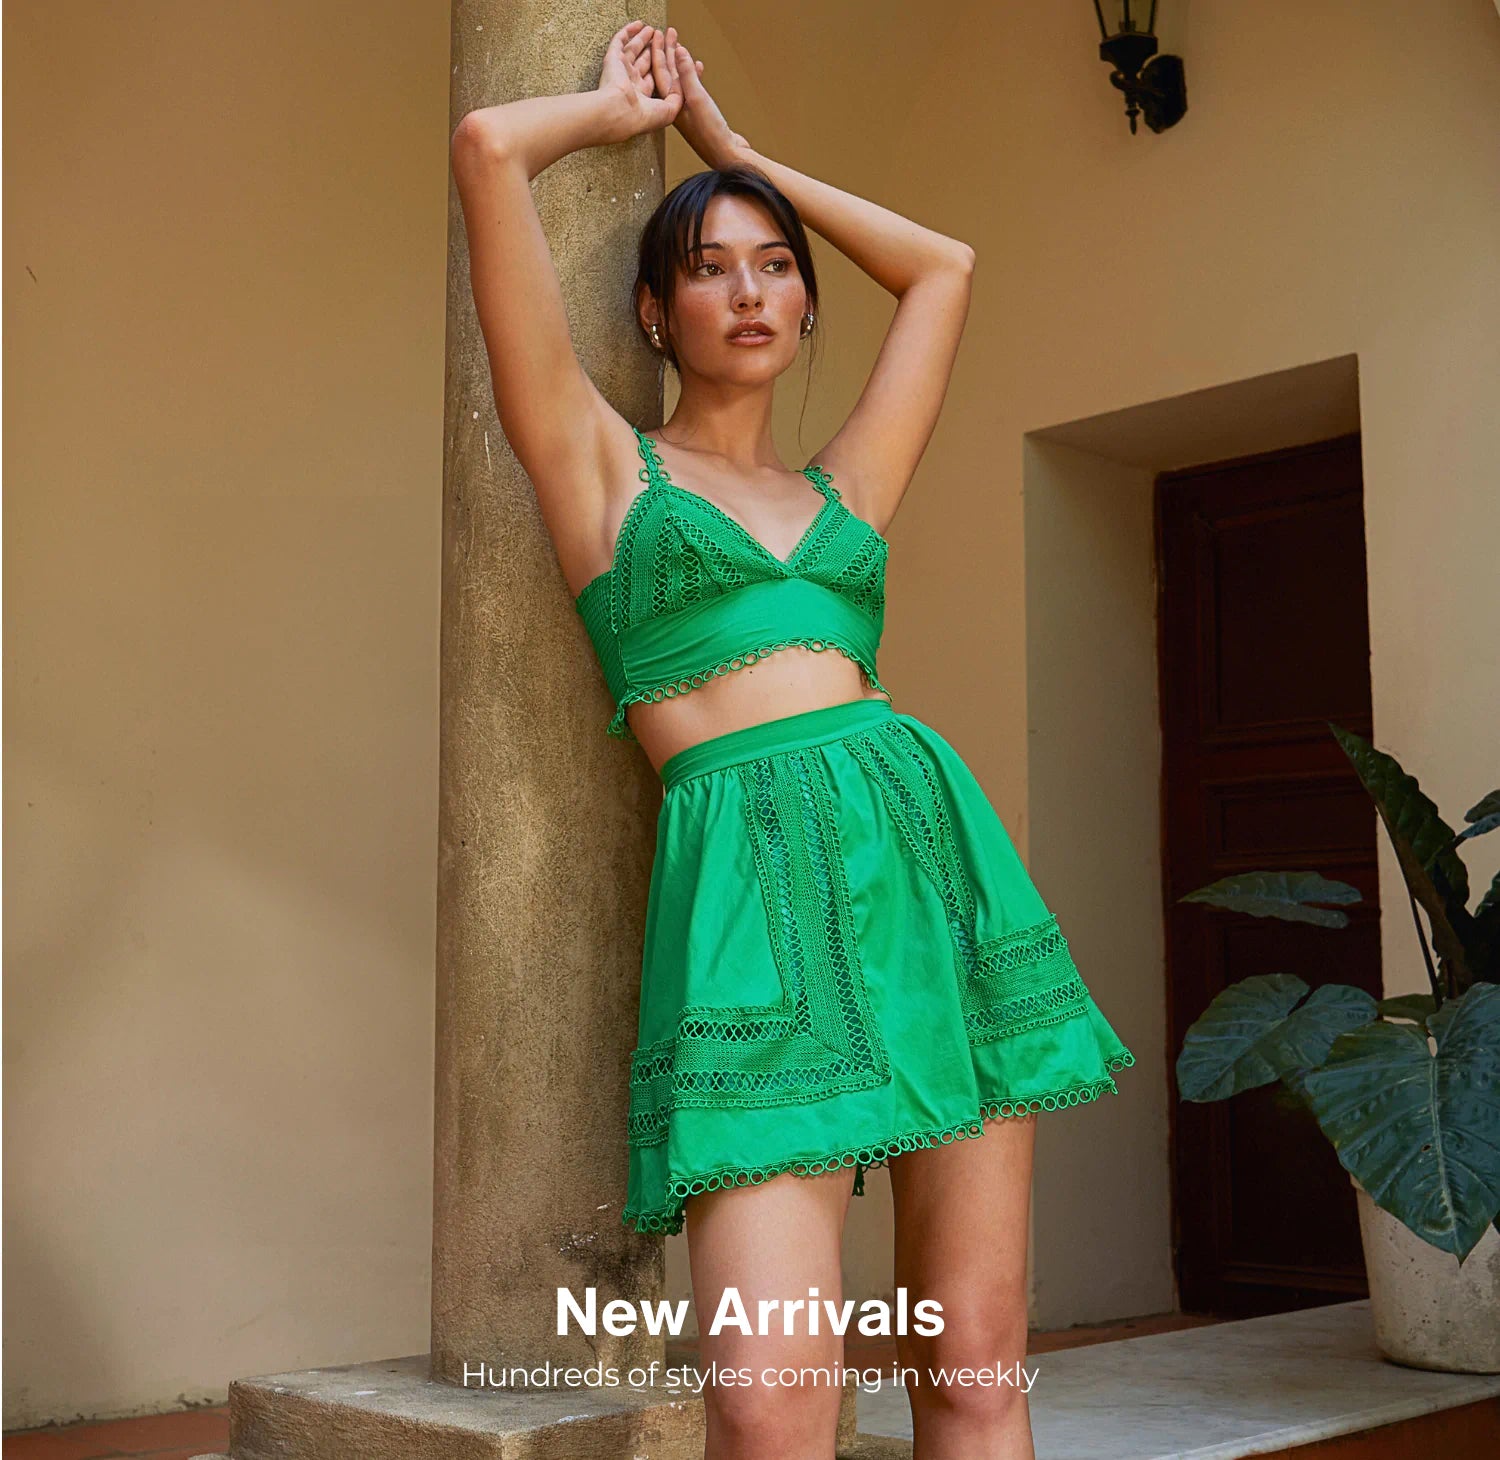 New Arrivals - hundreds of styles coming in weekly